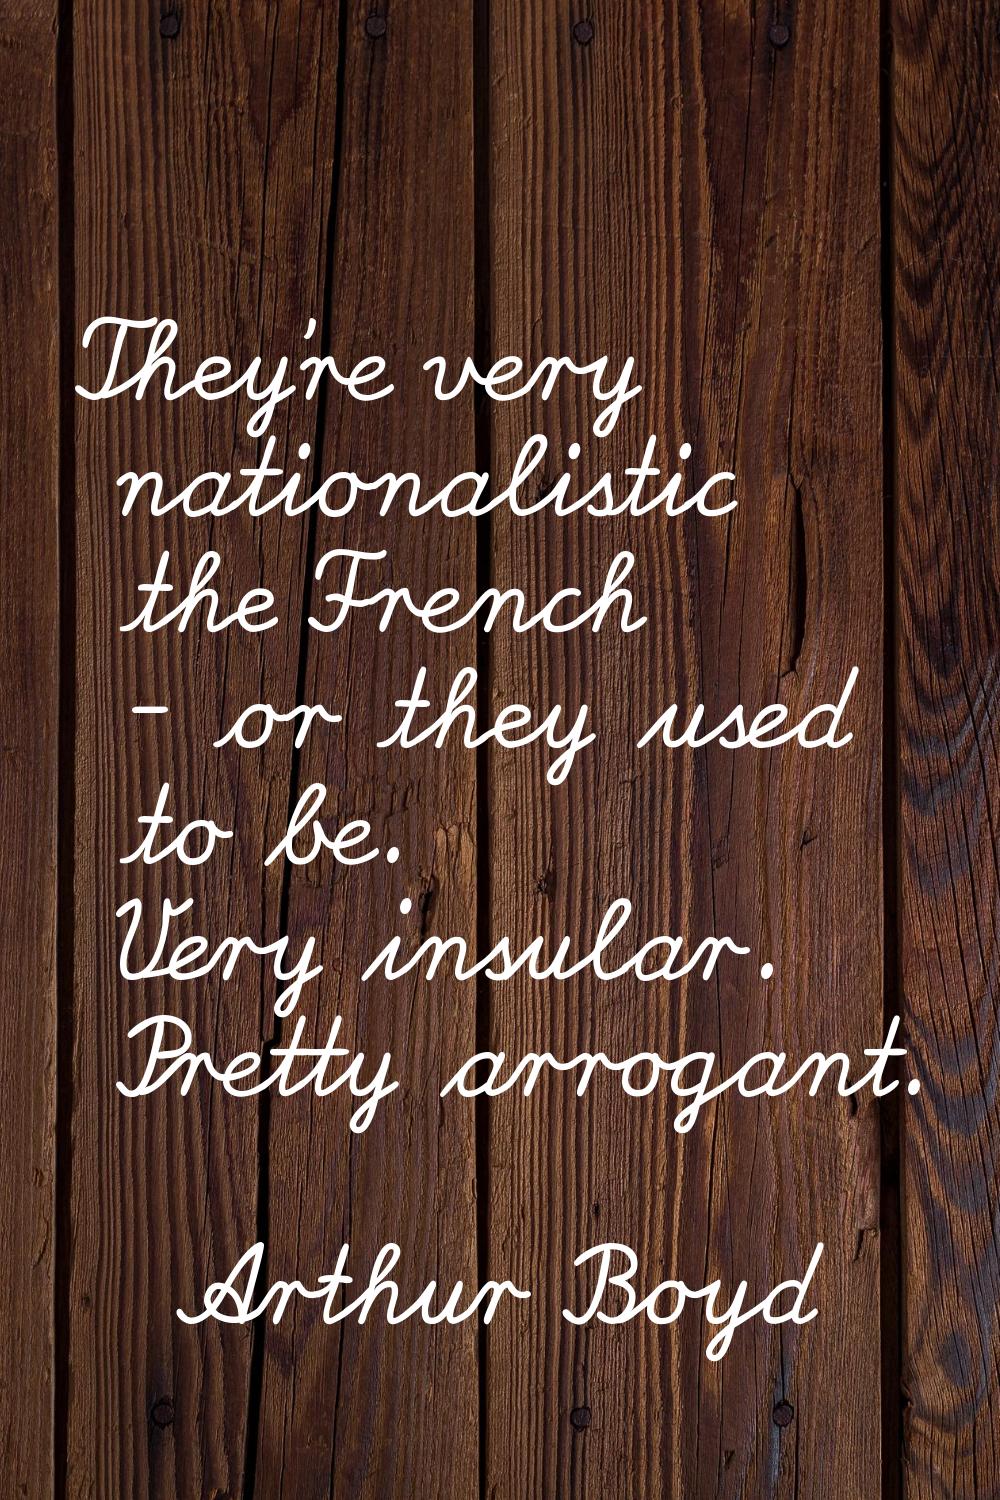 They're very nationalistic the French - or they used to be. Very insular. Pretty arrogant.